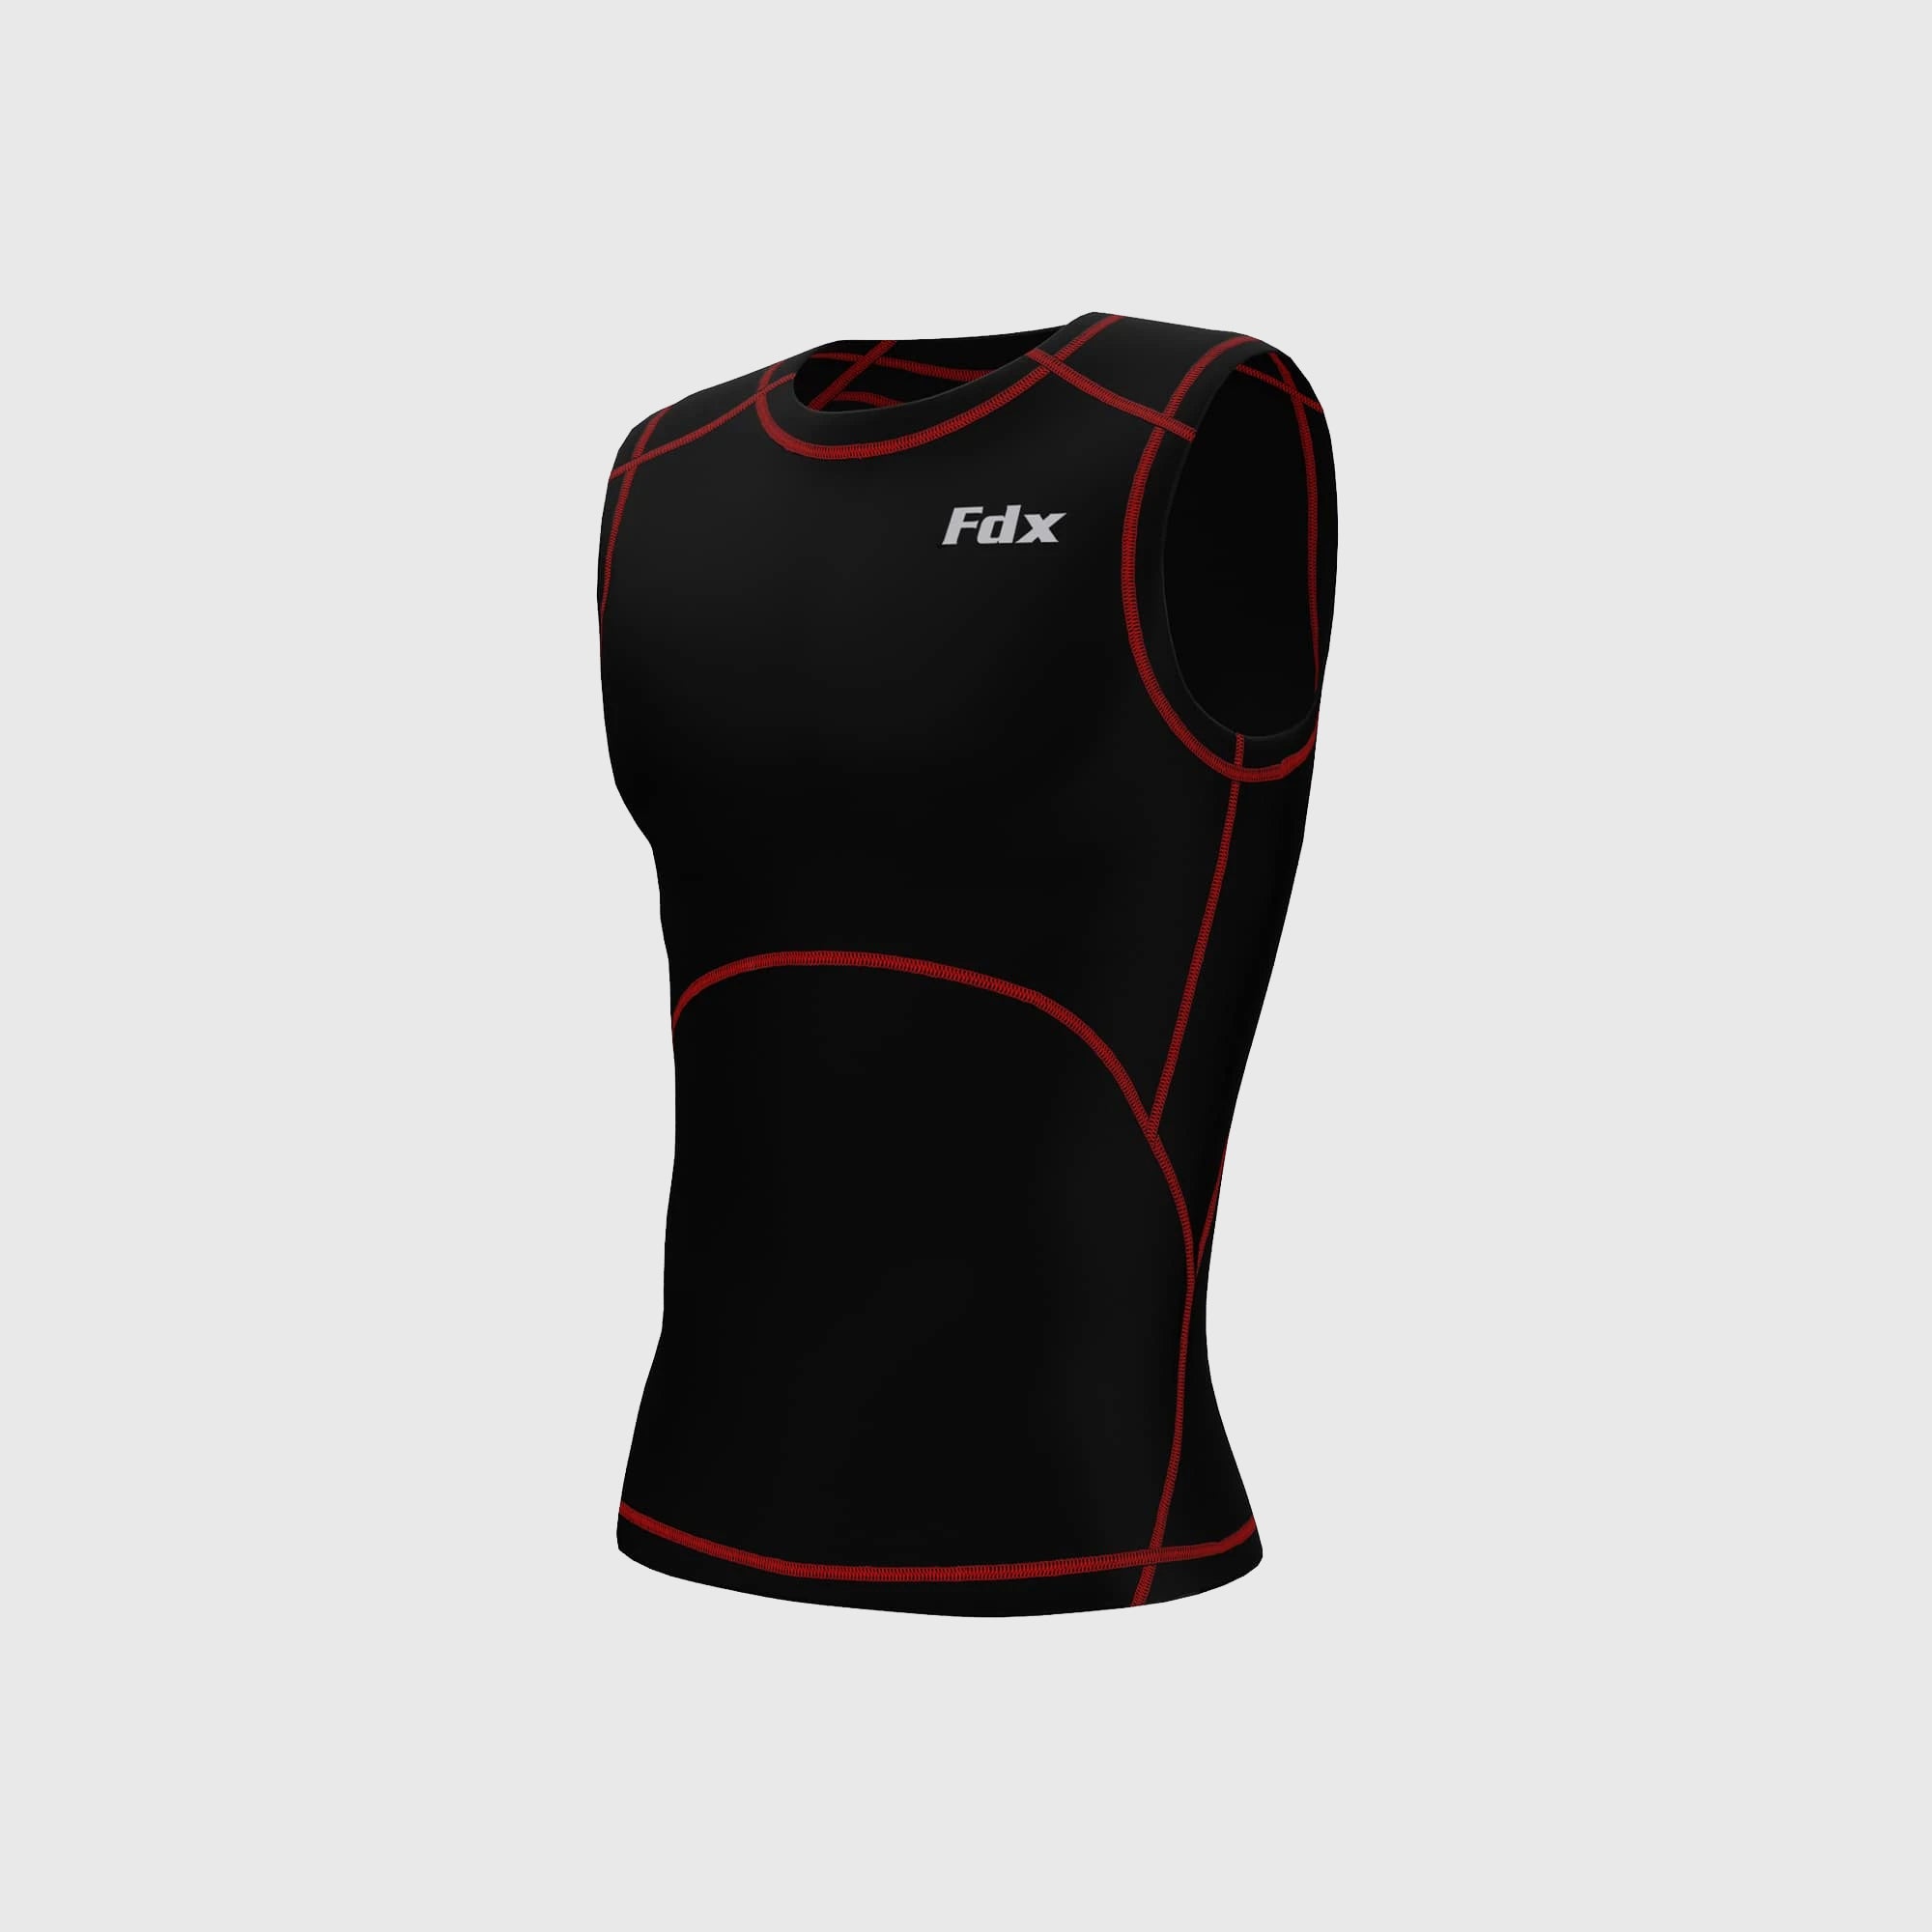 Fdx Men's Red Sleeveless Compression Top Running Gym Workout Wear Rash Guard Stretchable Breathable Base layer Shirt - Aeroform